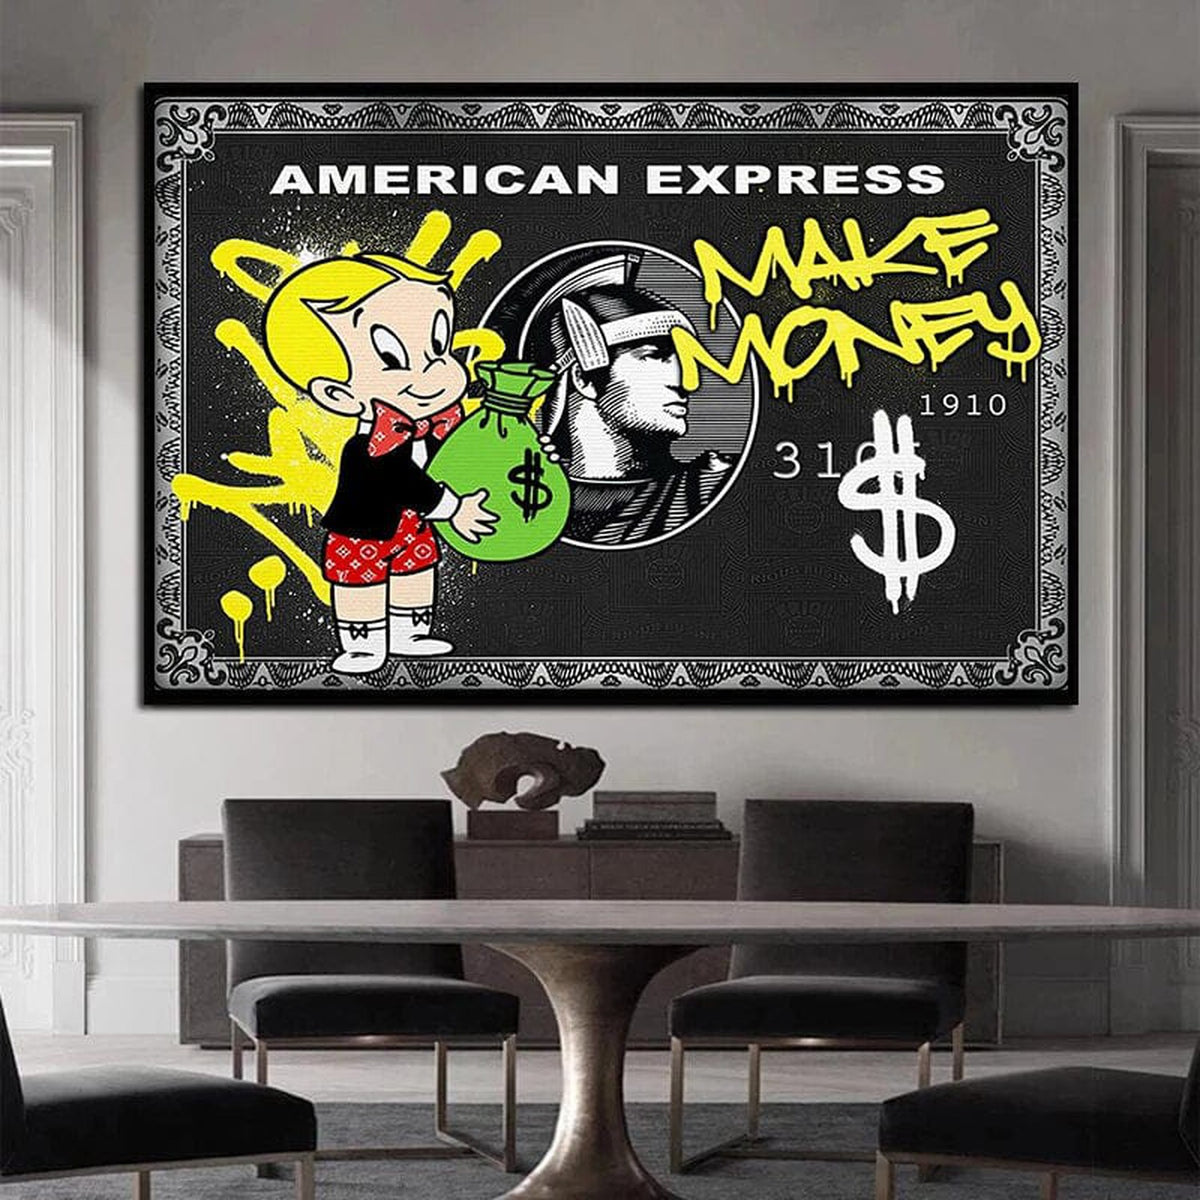 American Express Make Money: The Richie Rich Poster